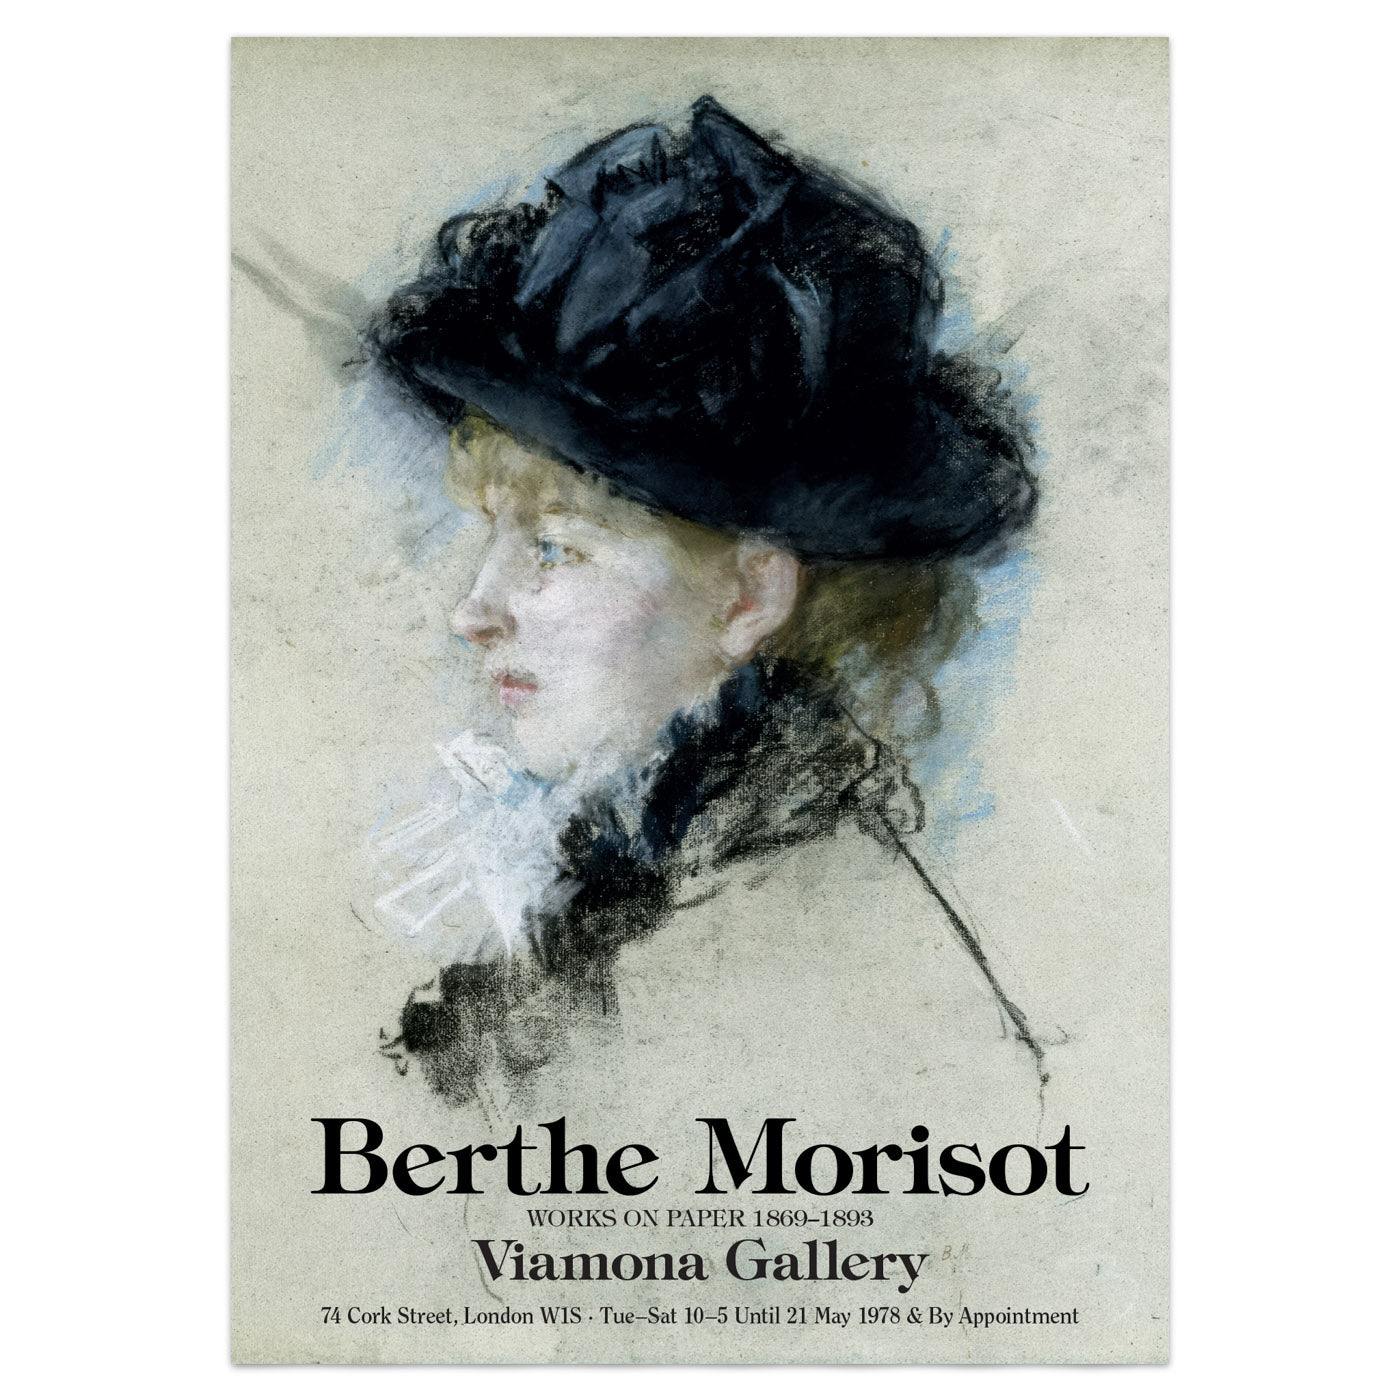 Berthe Morisot art exhibition poster with a focus on her Impressionist pastel works